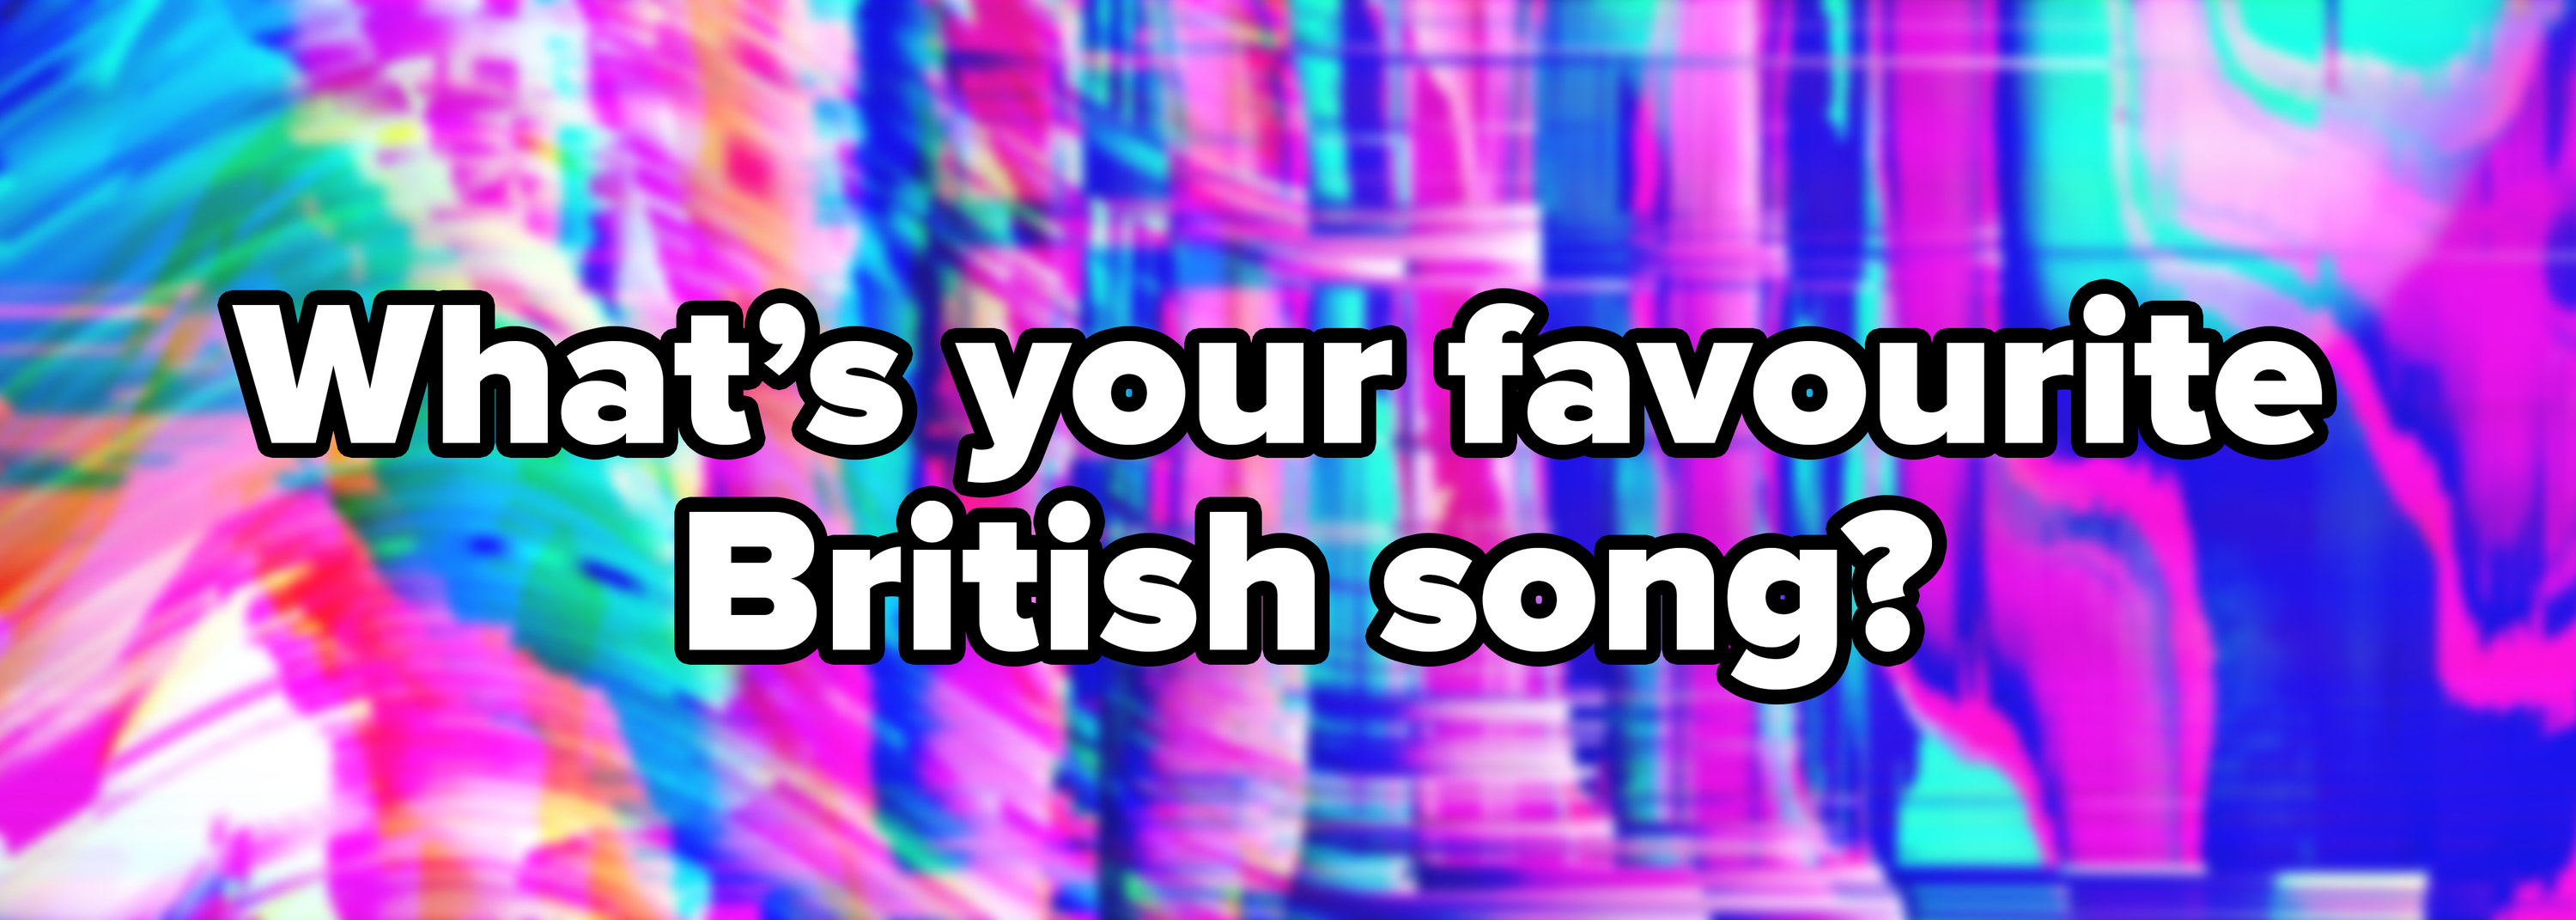 Abstract pink blue psychedelic background with the text What&#x27;s your favourite British song written on top